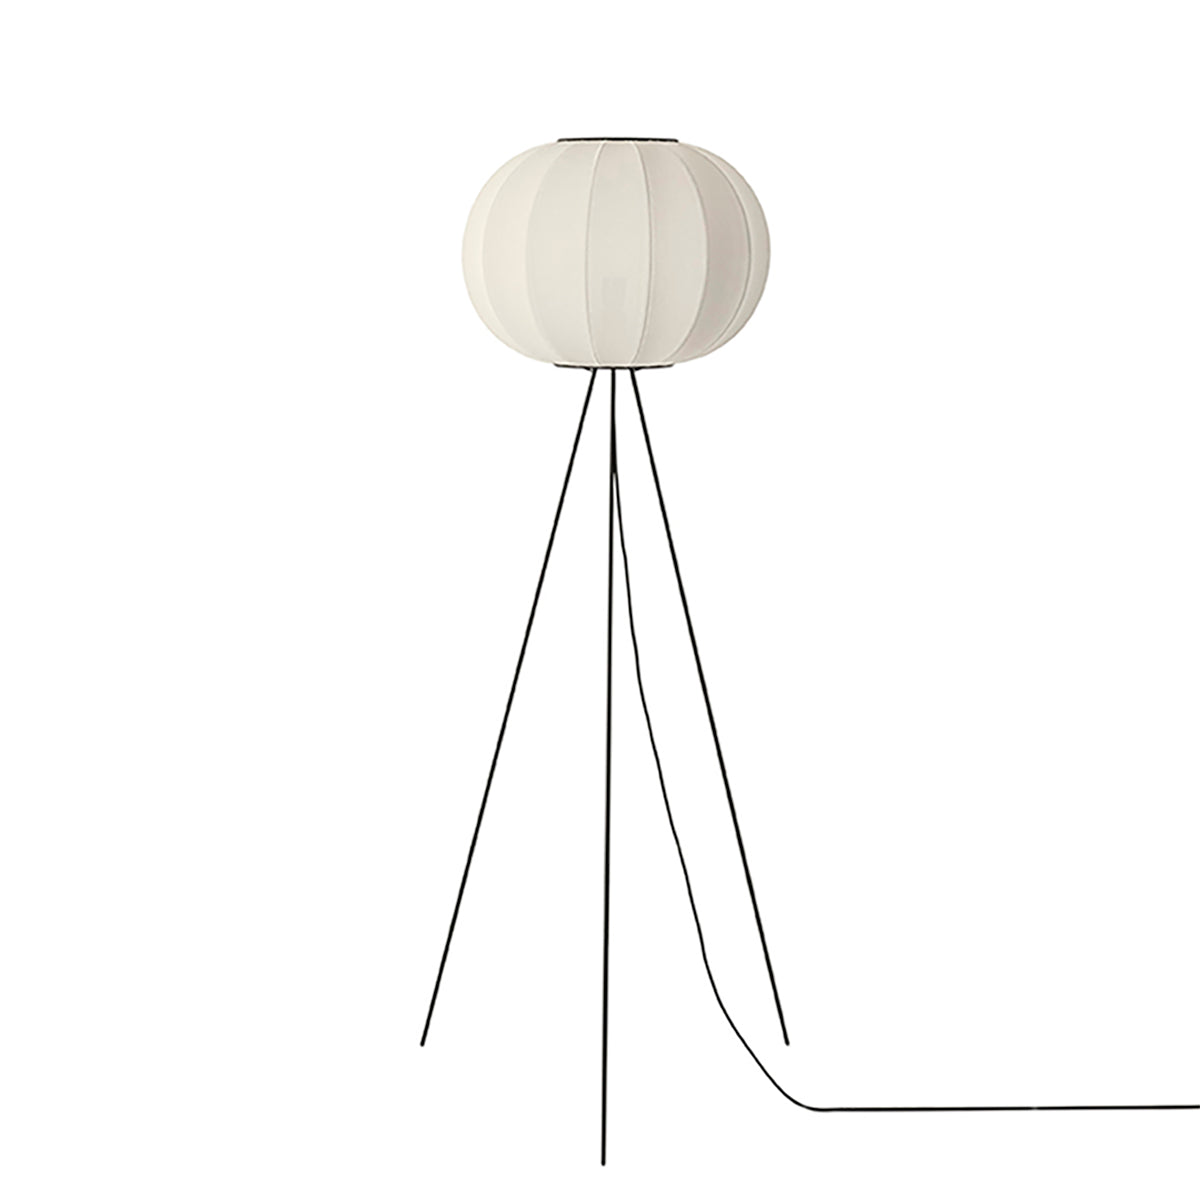 Knit-Wit Floor Lamp: Round 45 + High + Pearl White